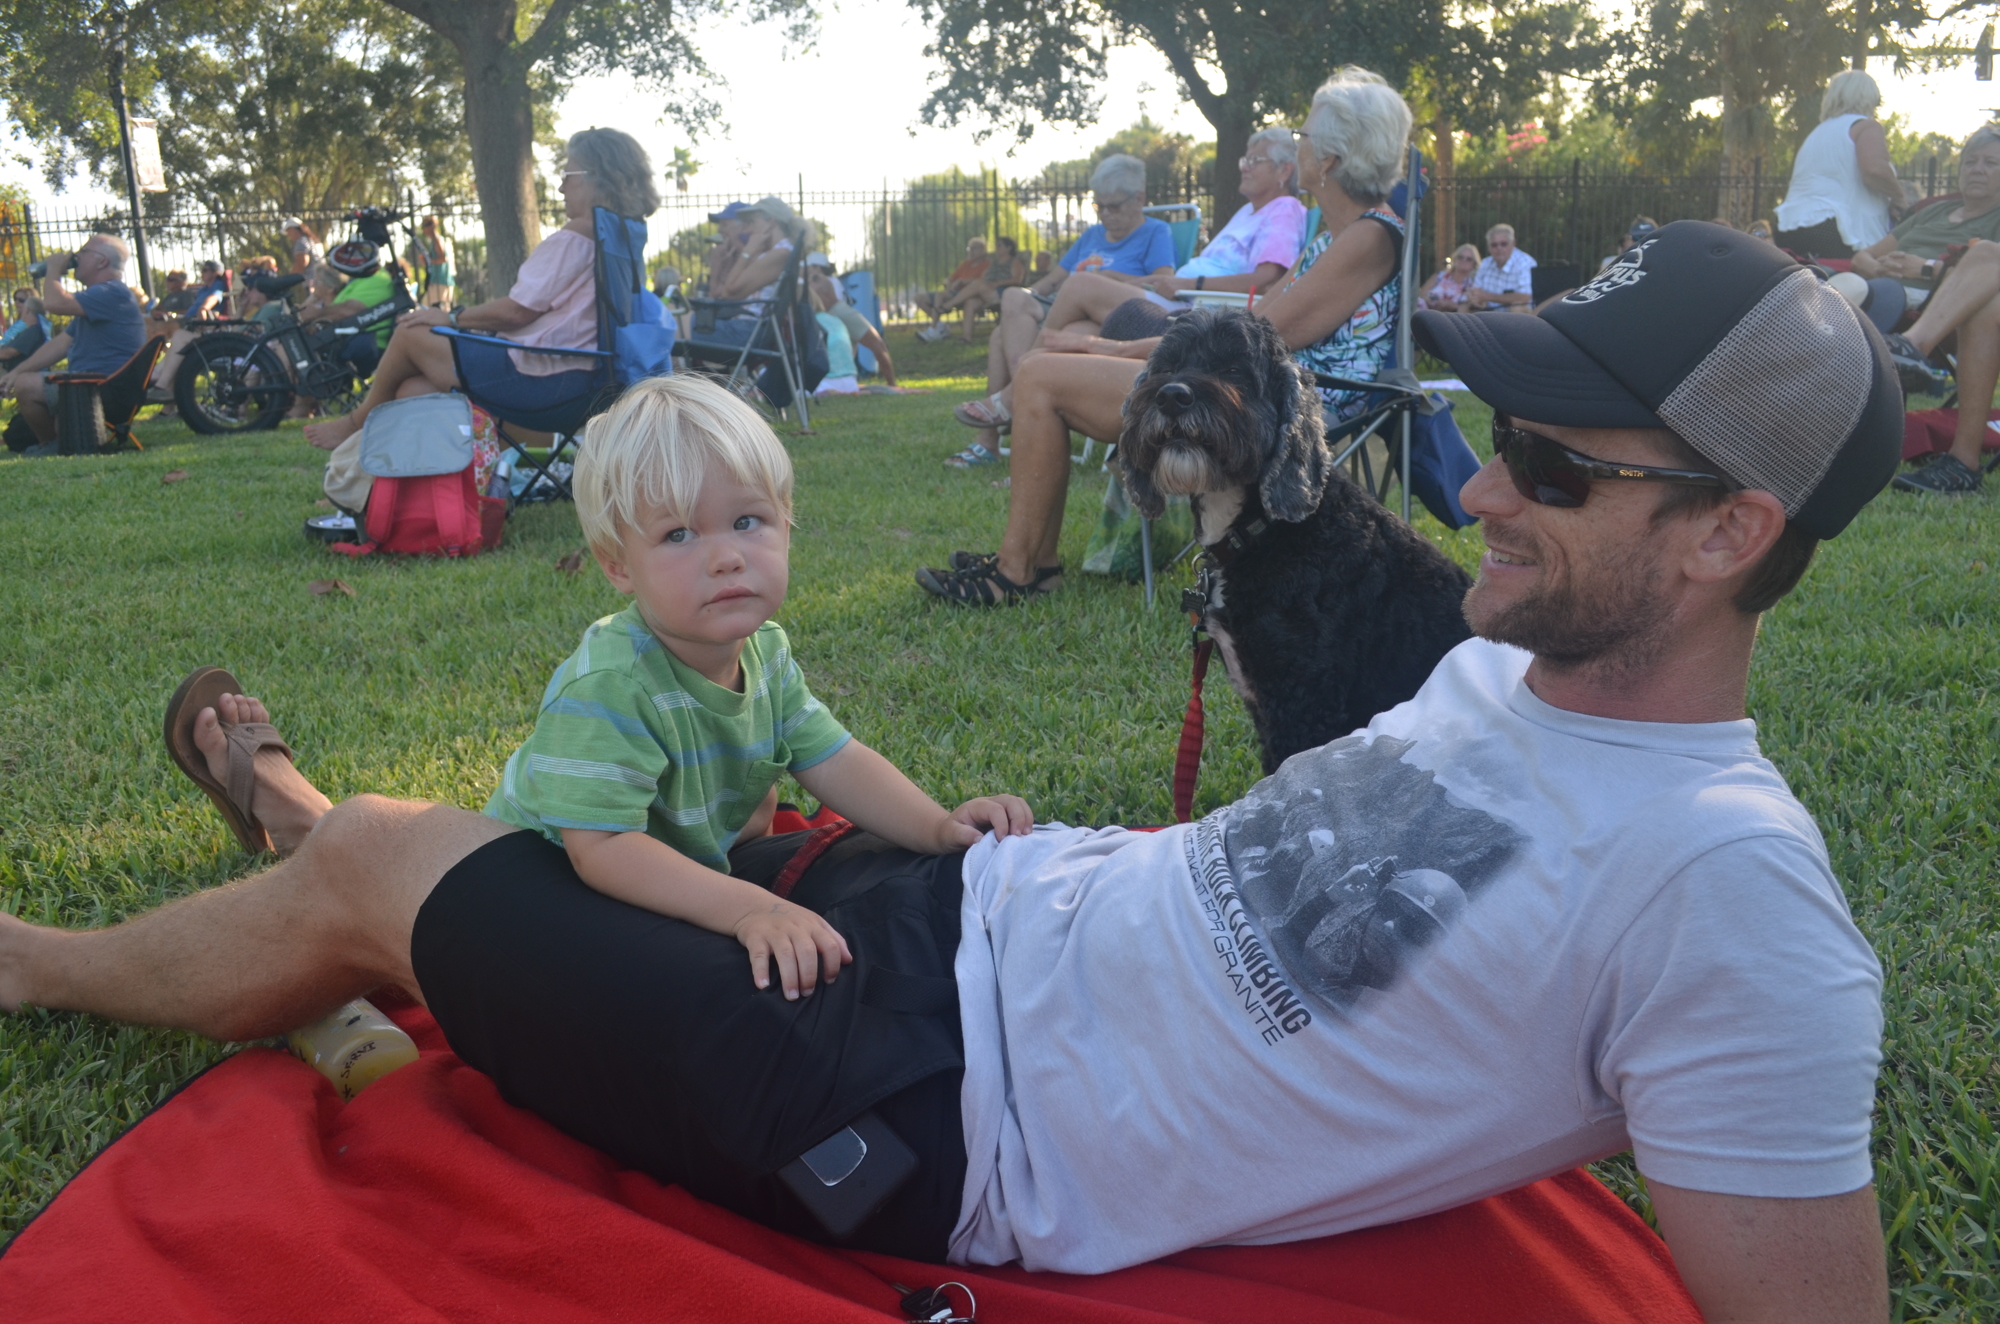 Jack and Josh Servi, and their dog Calvin, set up their blanket in Rockefeller Gardens to enjoy the first Summer Sounds concert of the series. Photo by Mia Striegel